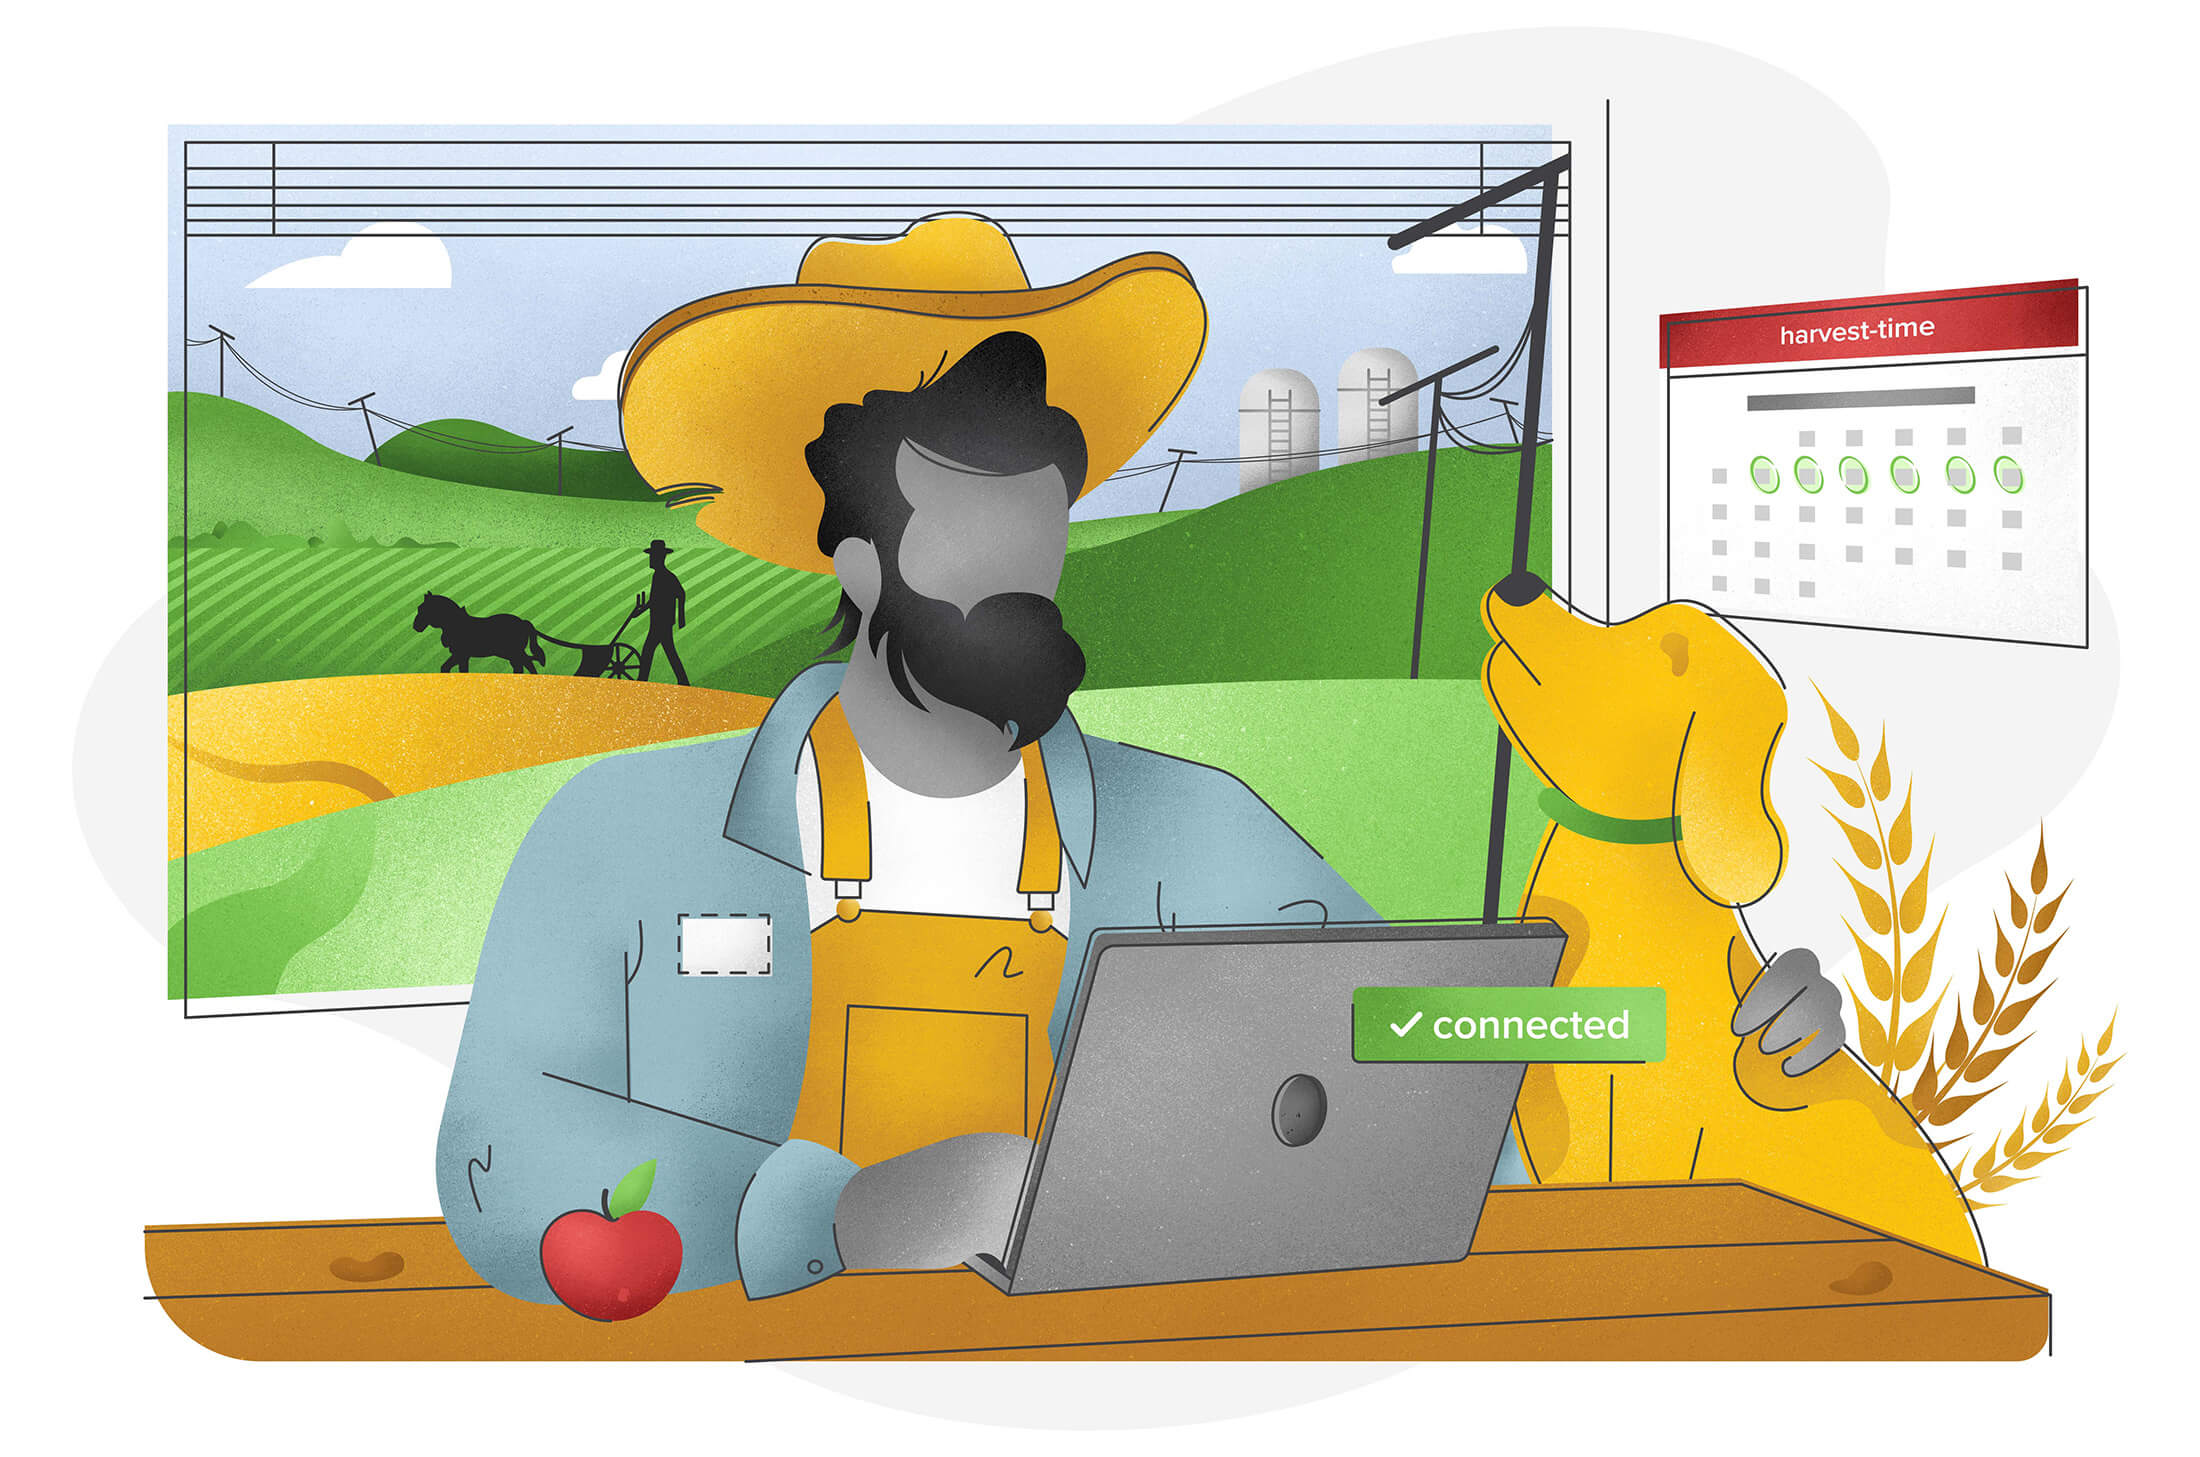 A farmer in hat, overalls, and jacket pets a yellow dog and types on a laptop. A green, successful alert box ensures us that he is connected. Behind him is a window of rolling green fields being tilled in a horse-drawn way.